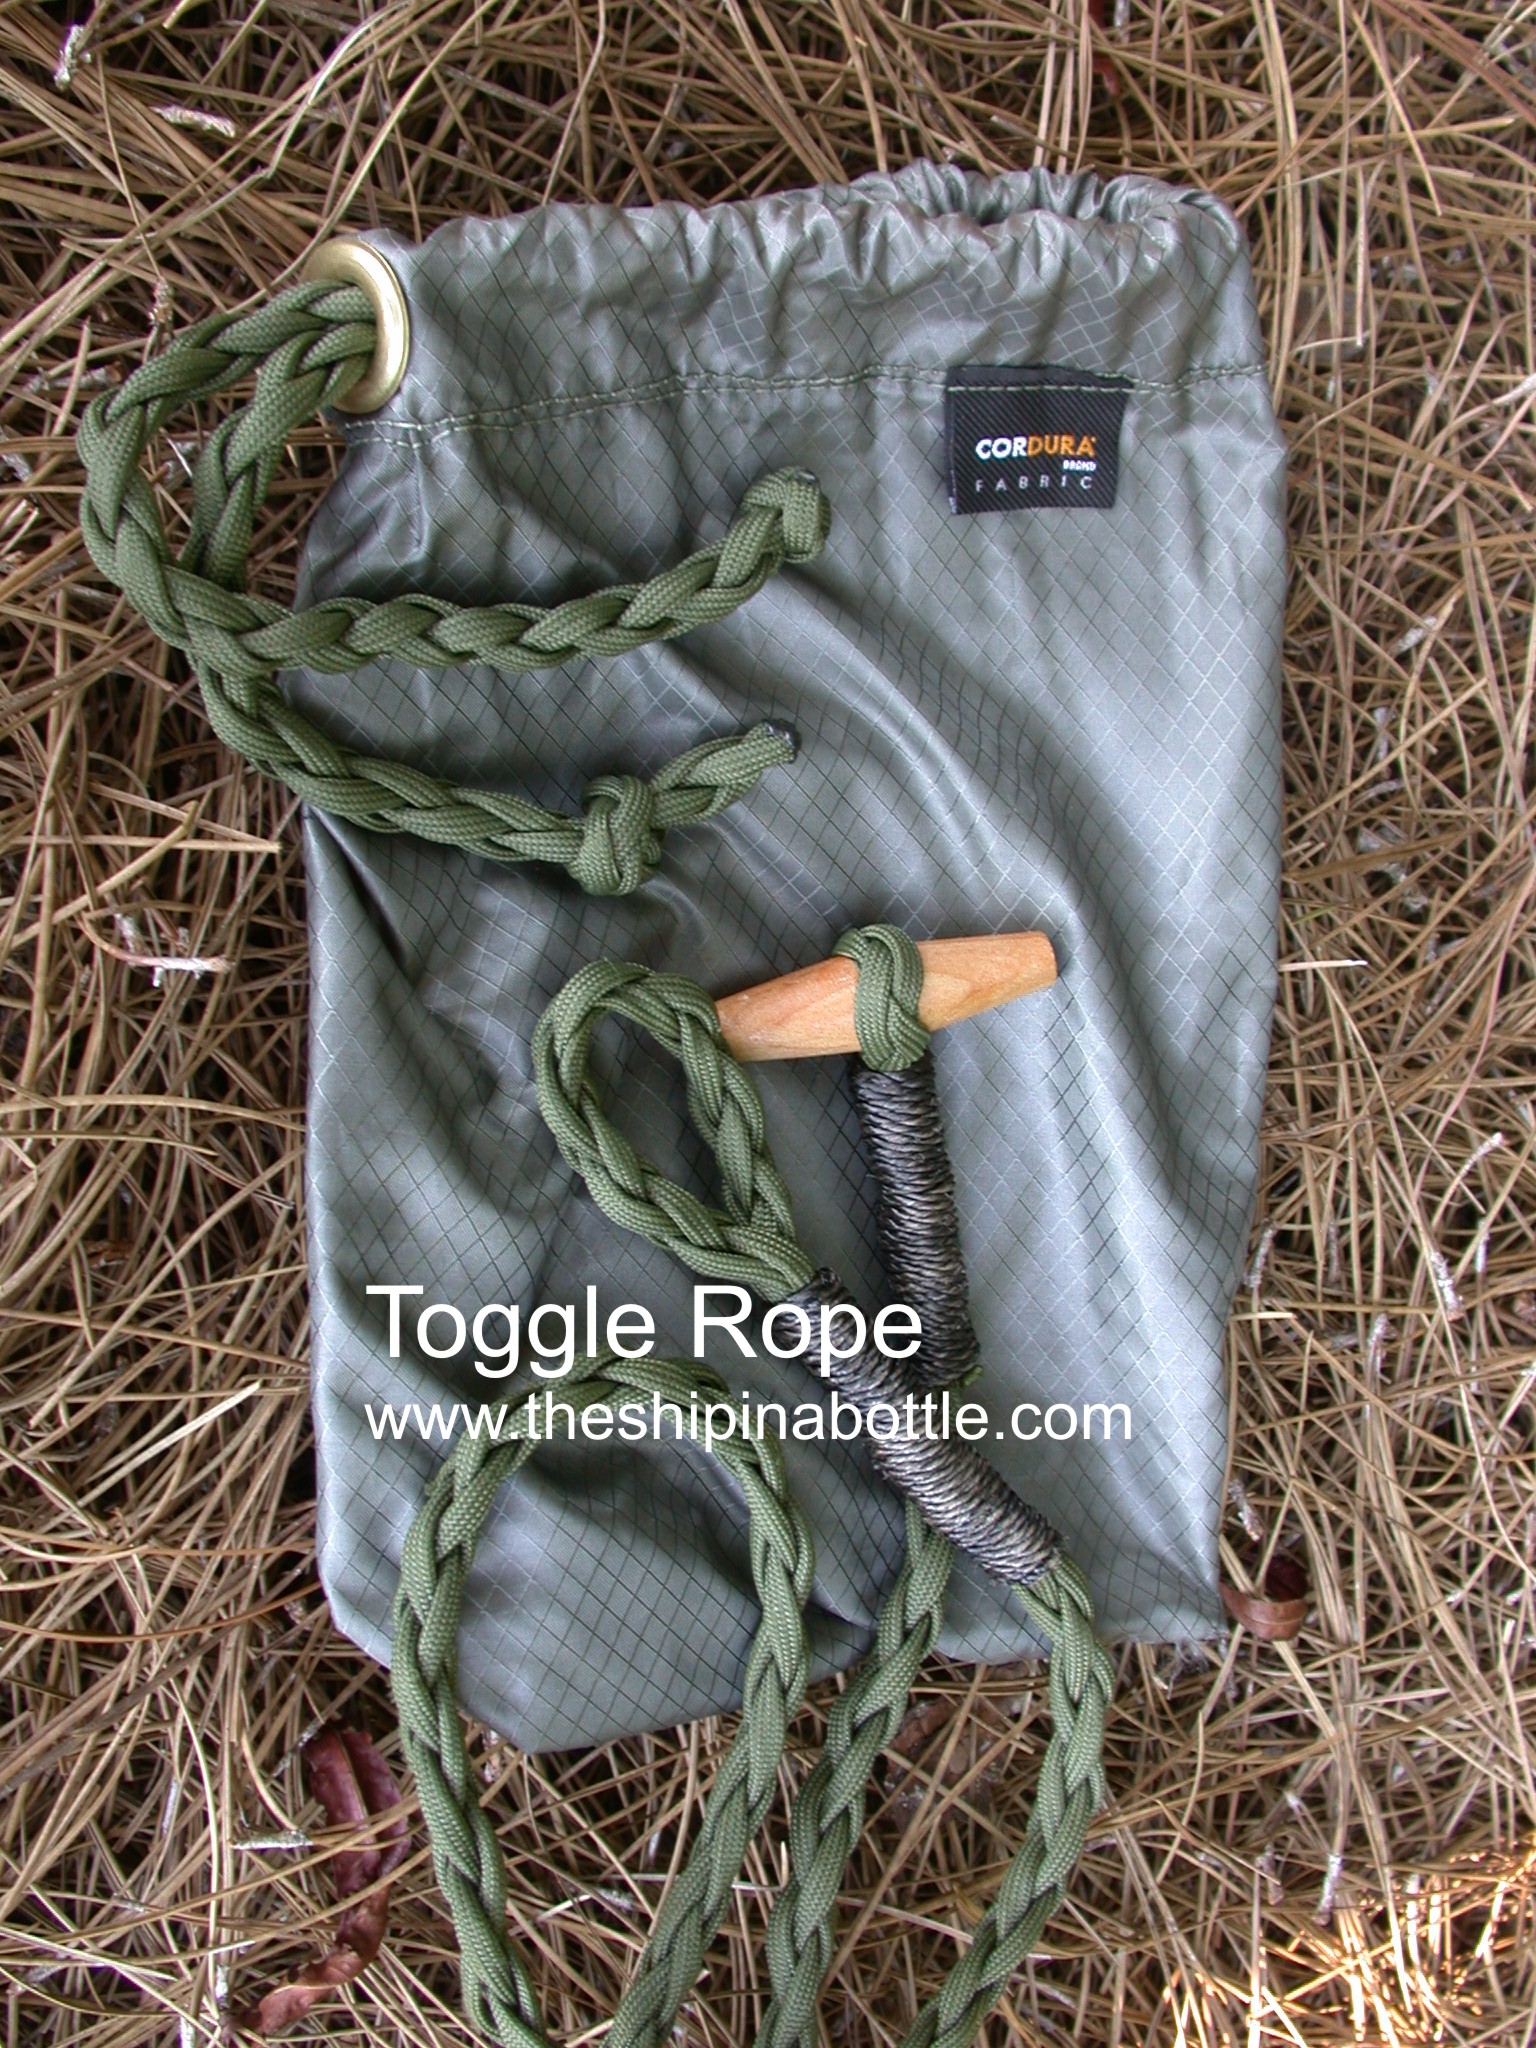 Our own very unique Toggle Rope - www.theshipinabottle.com